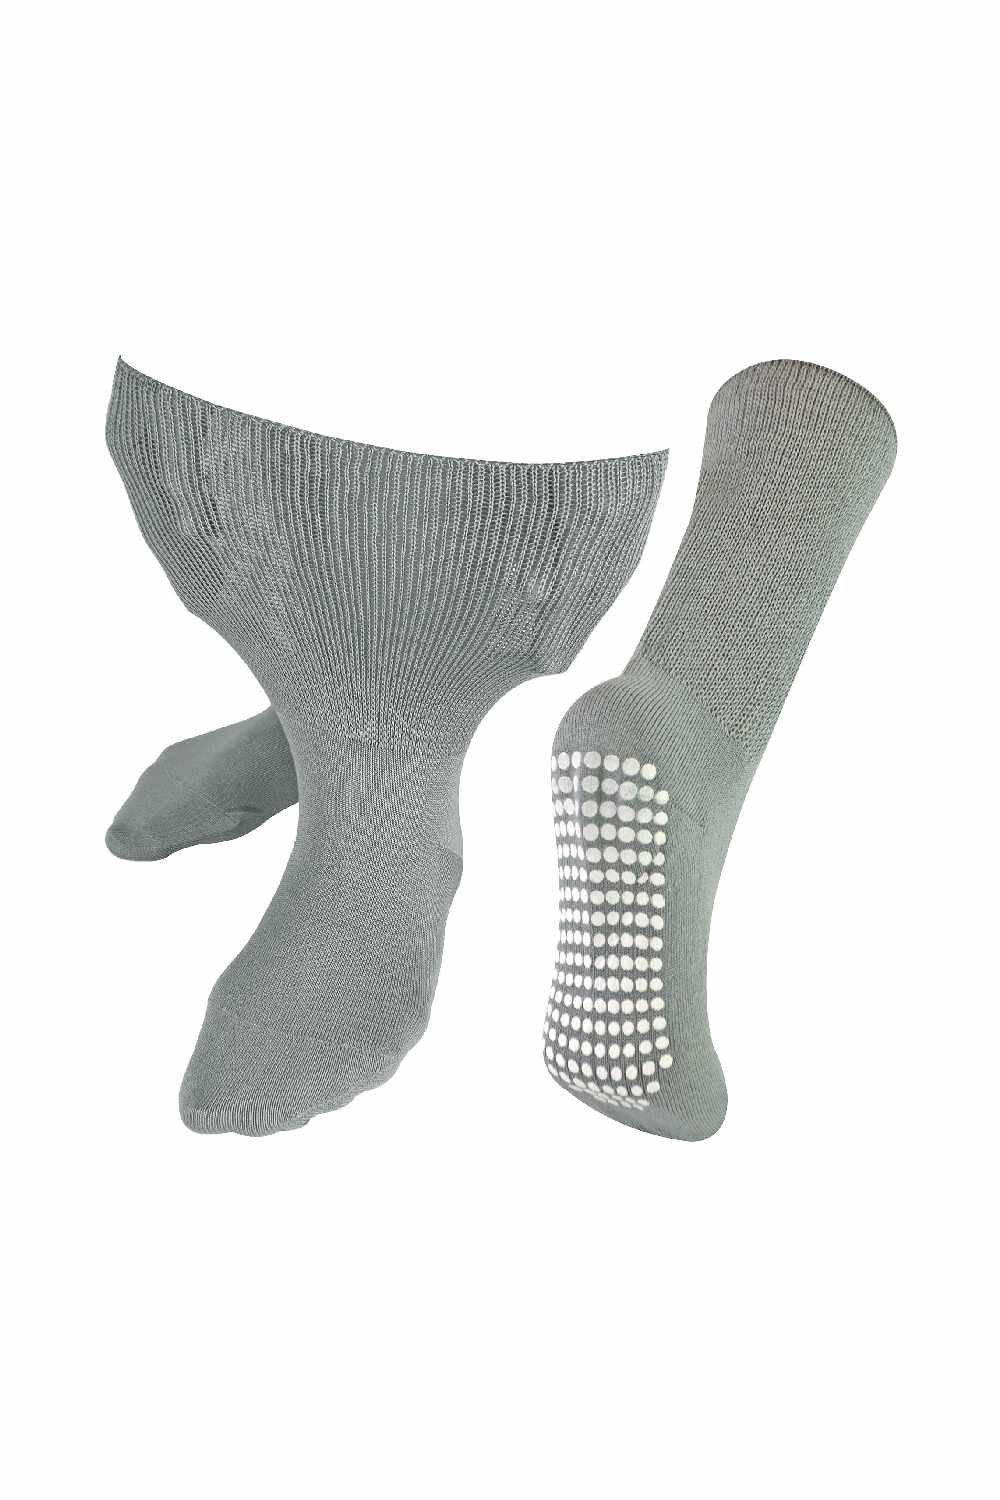 Extra Wide Bamboo Oedema Socks with Non Slip Grips for Swollen Legs